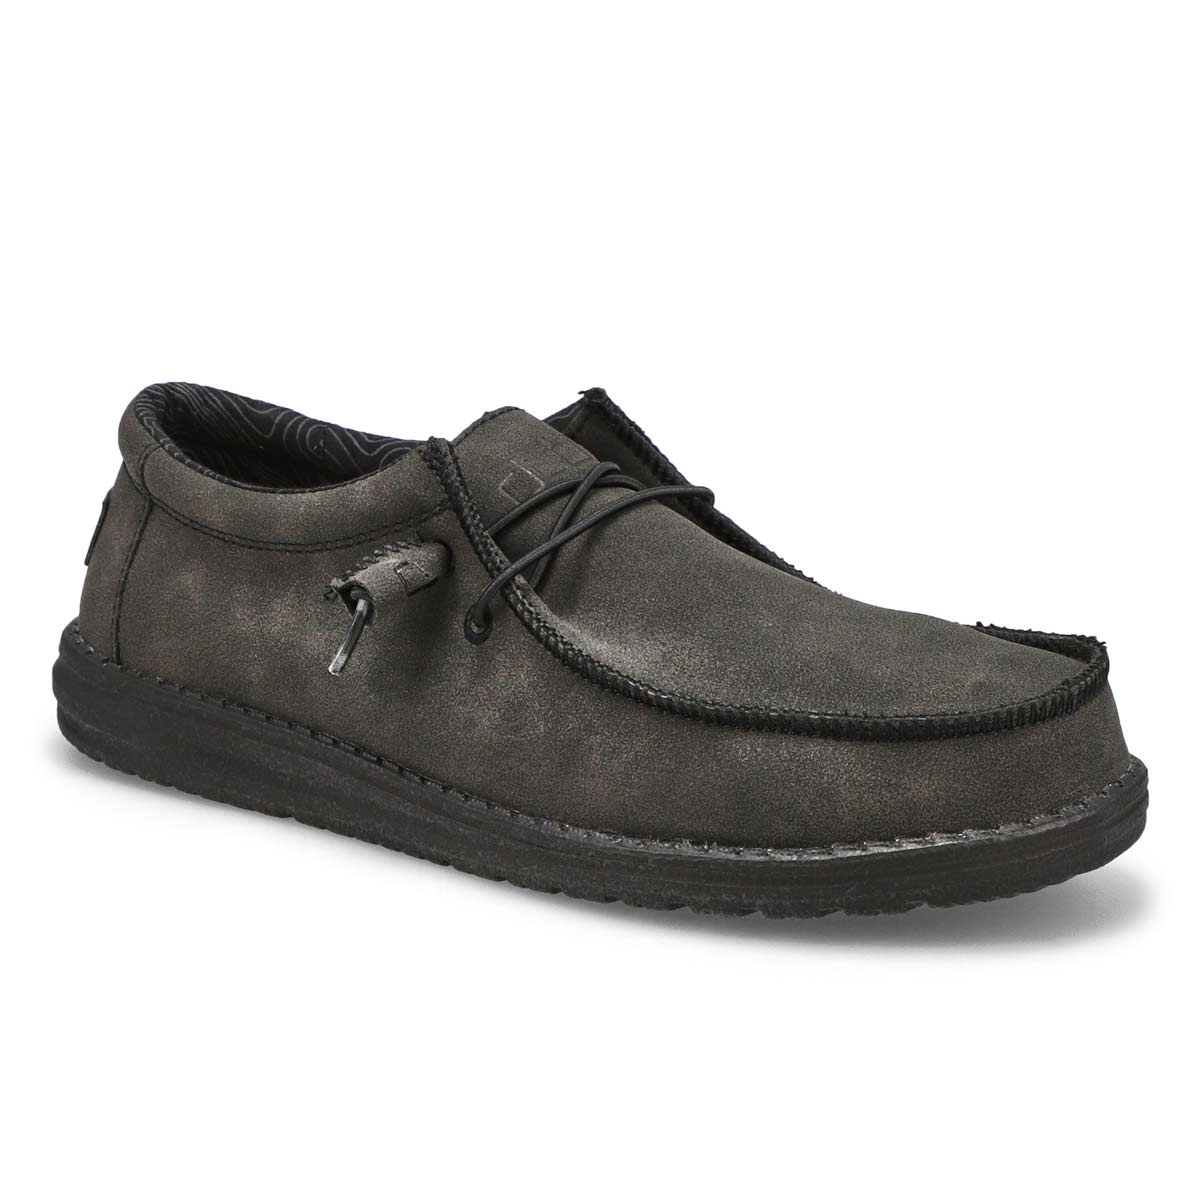 Men's Wally Recycled Leather Shoe - Carbon